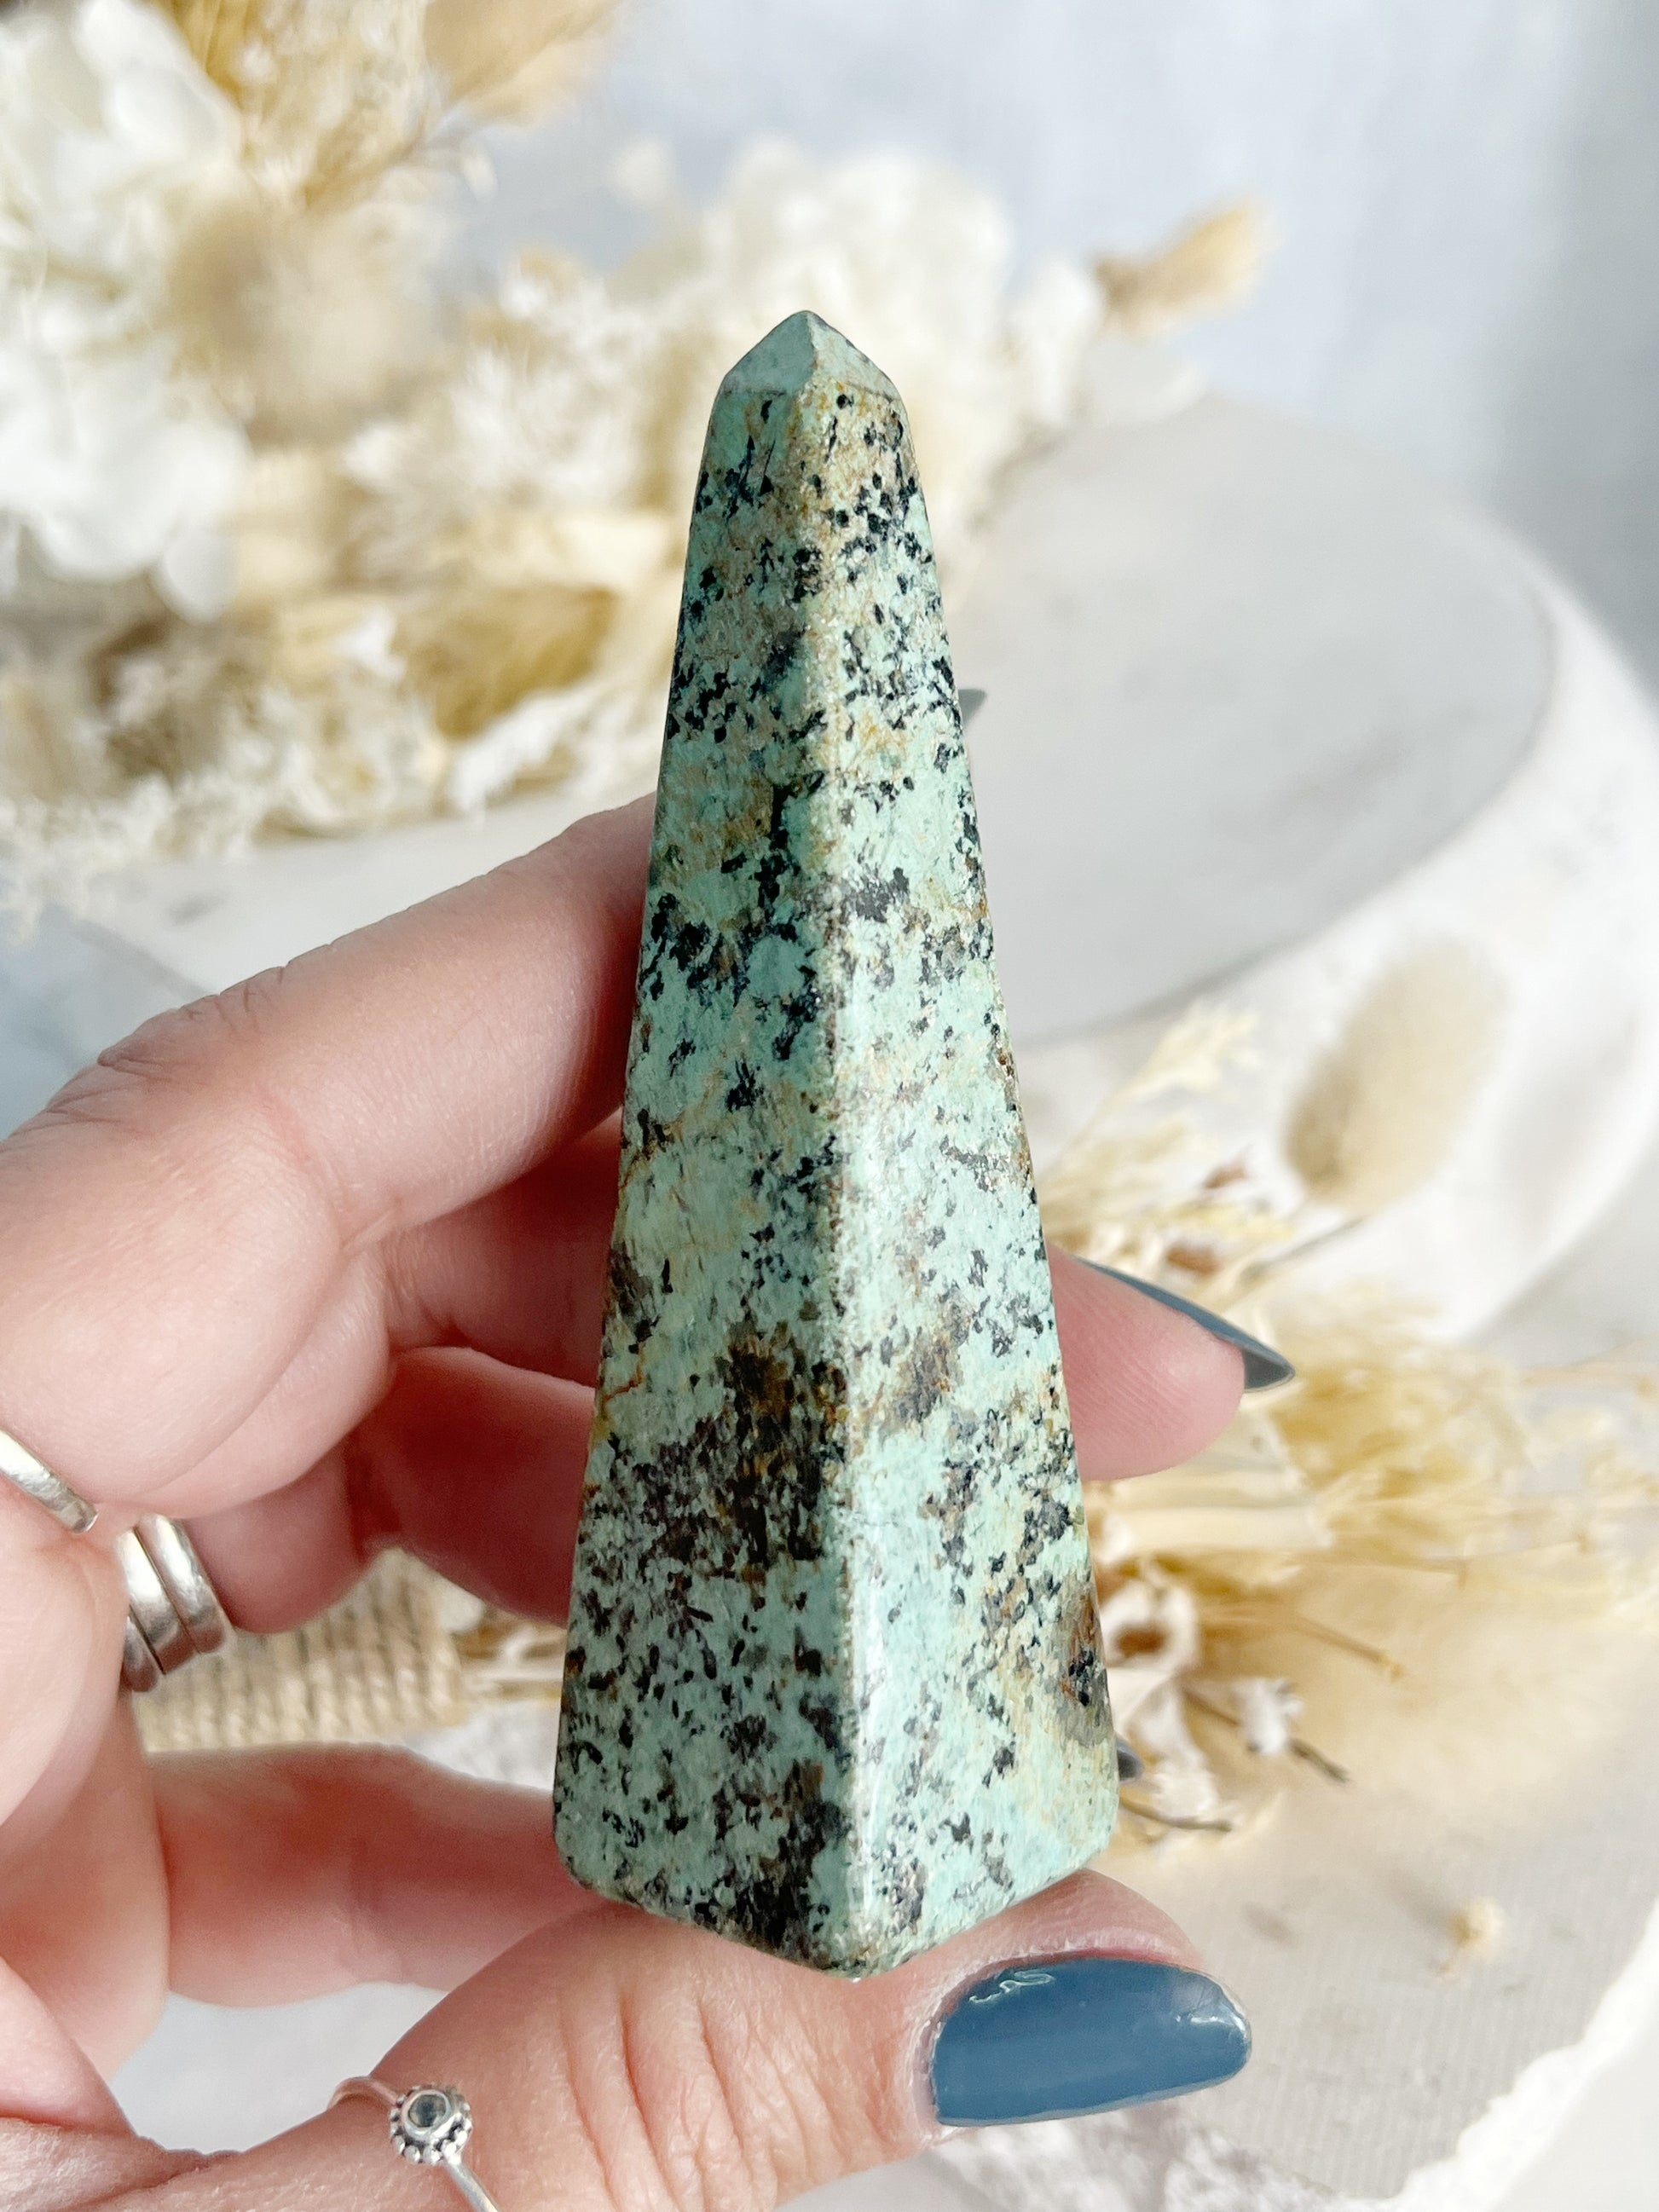 AFRICAN TURQUOISE TOWER STONED AND SAGED CRYSTAL SHOP AUSTRALIA